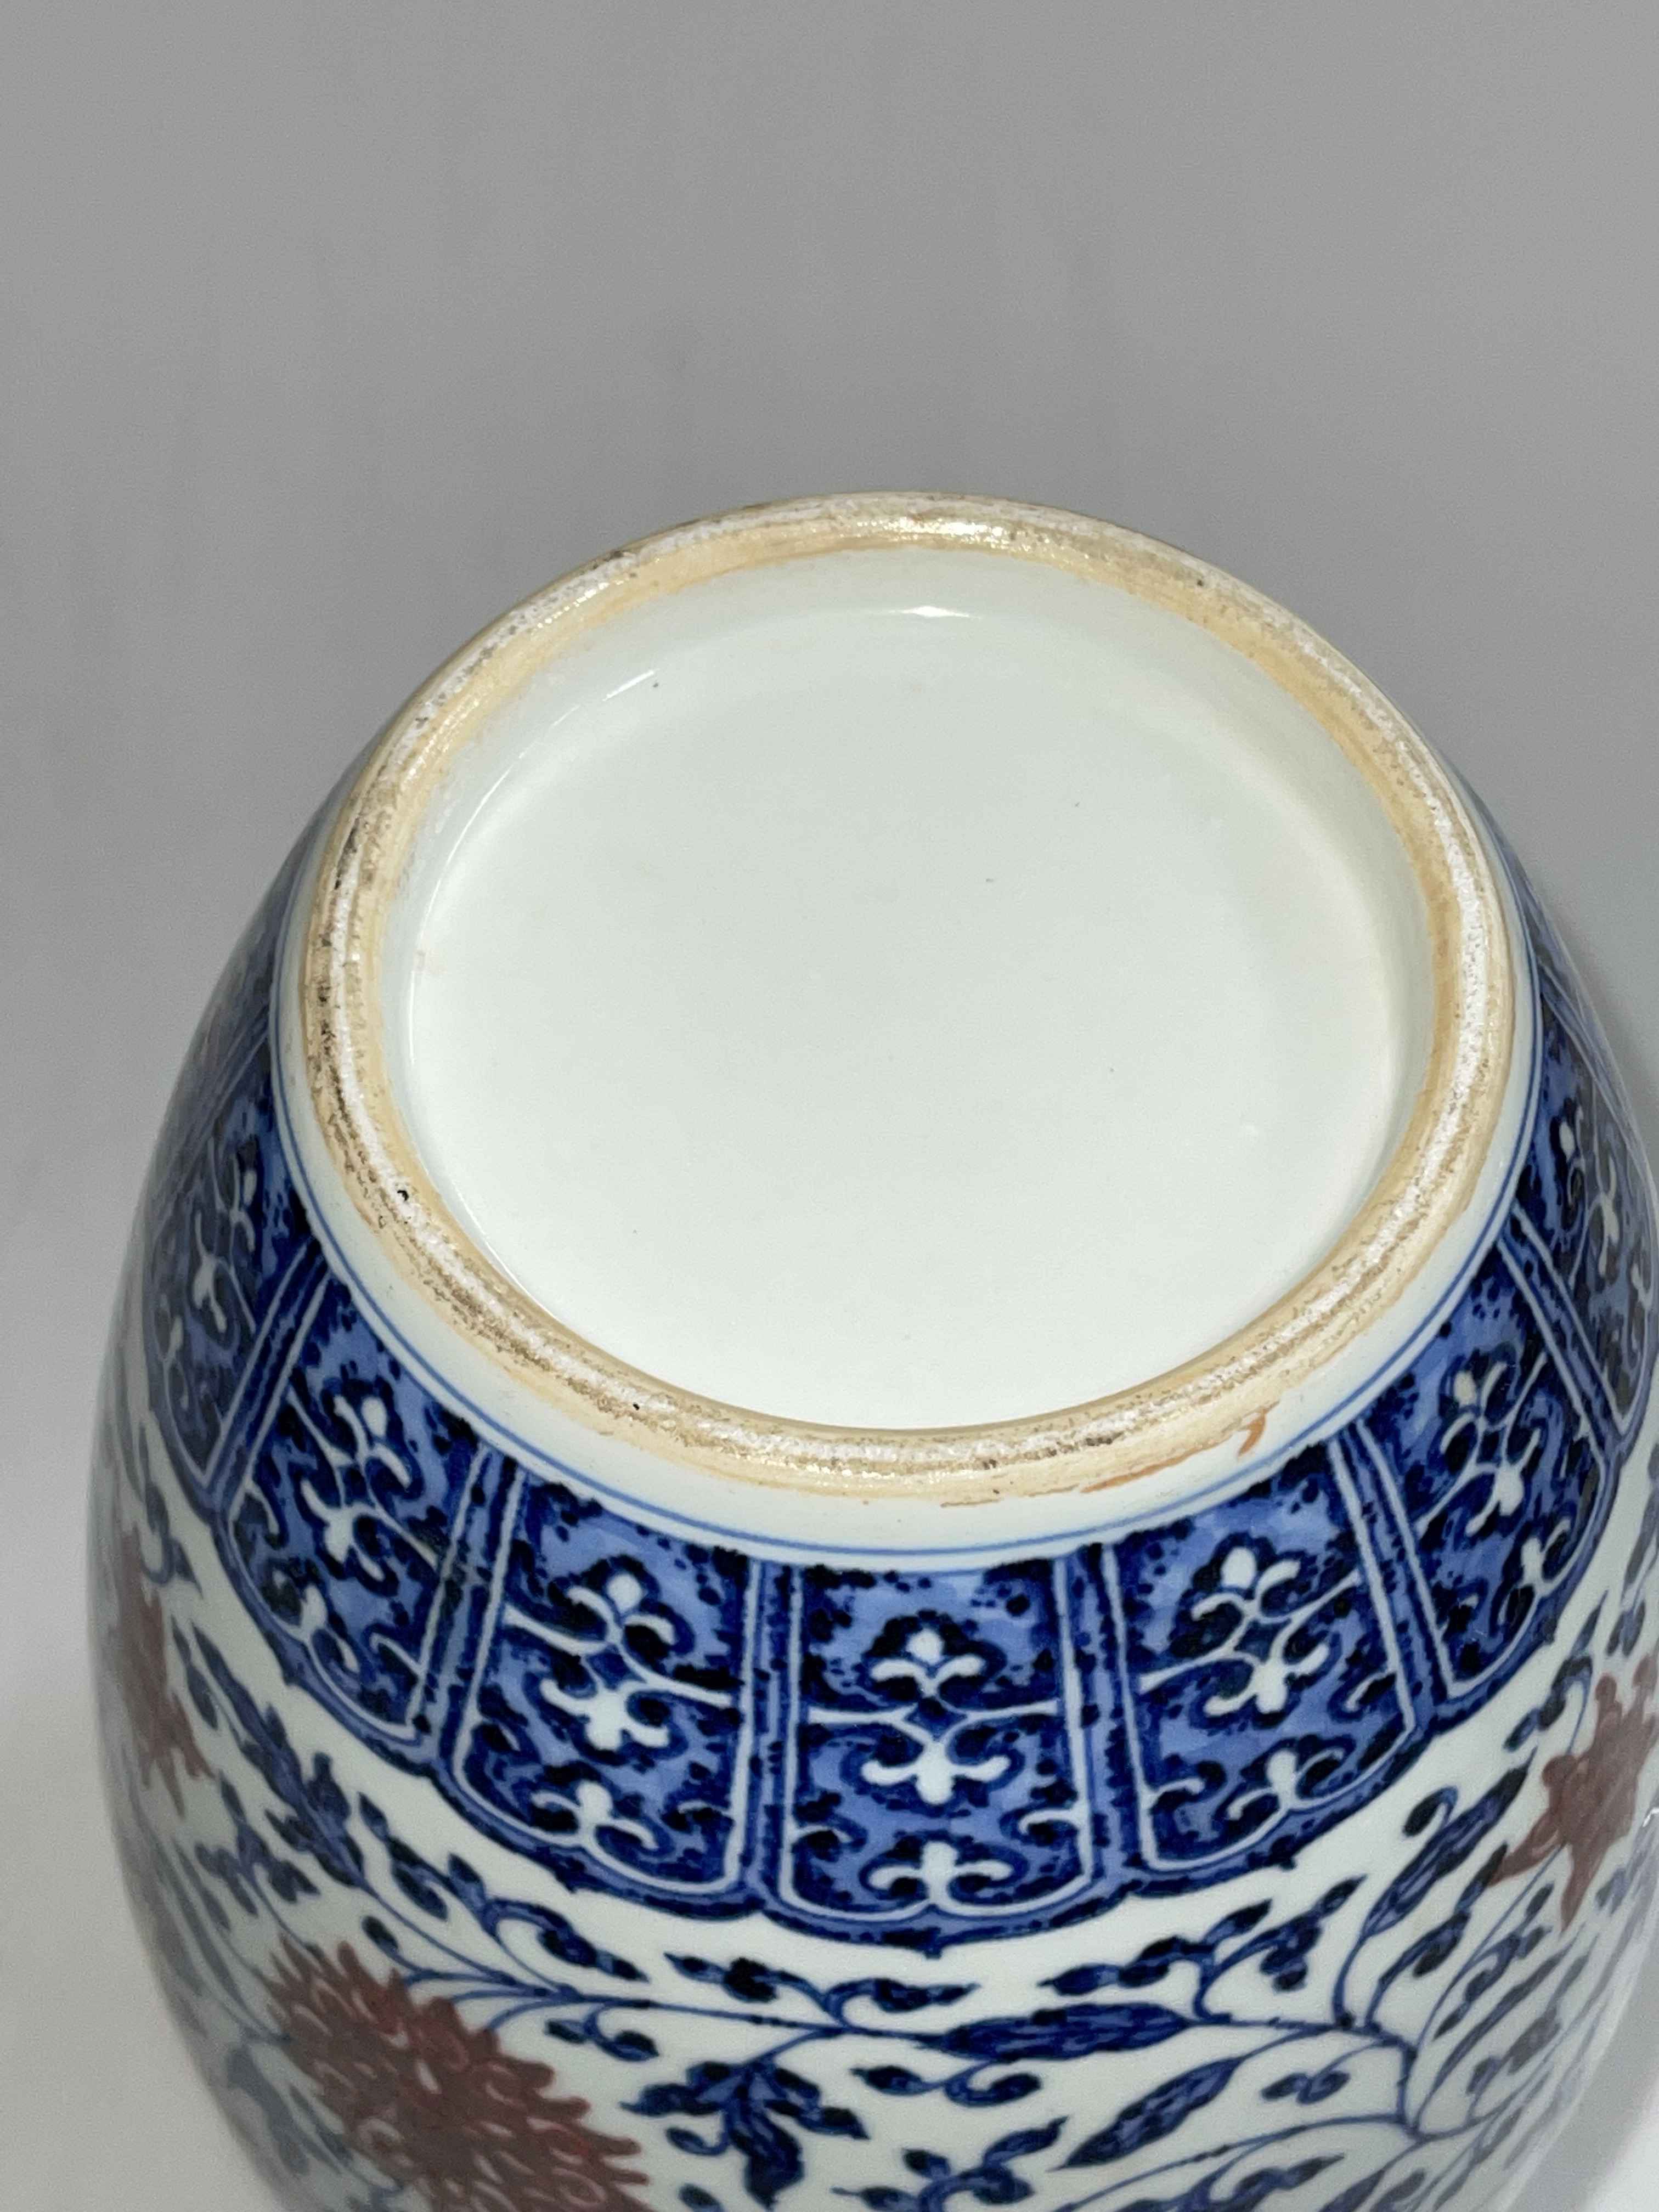 Large Chinese blue and white vase with red floral pattern, 39cm. - Image 2 of 2